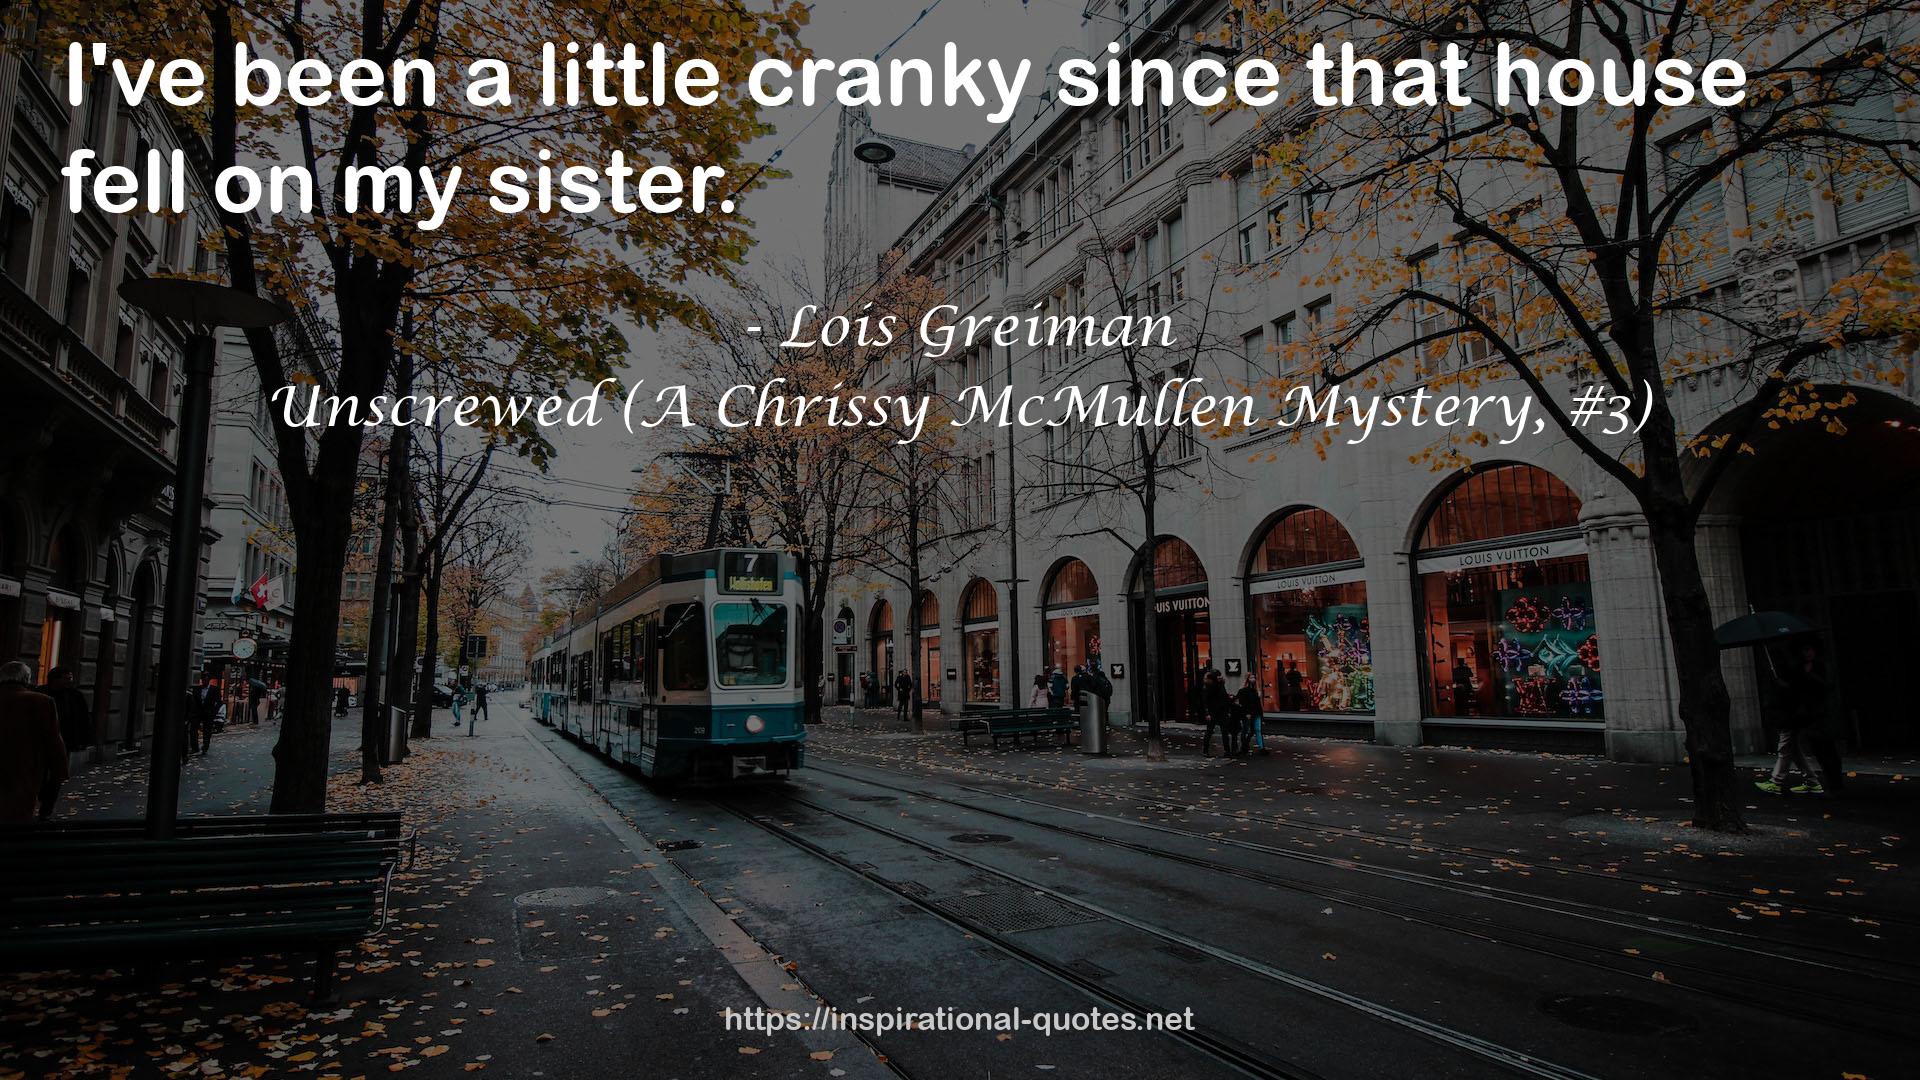 Unscrewed (A Chrissy McMullen Mystery, #3) QUOTES